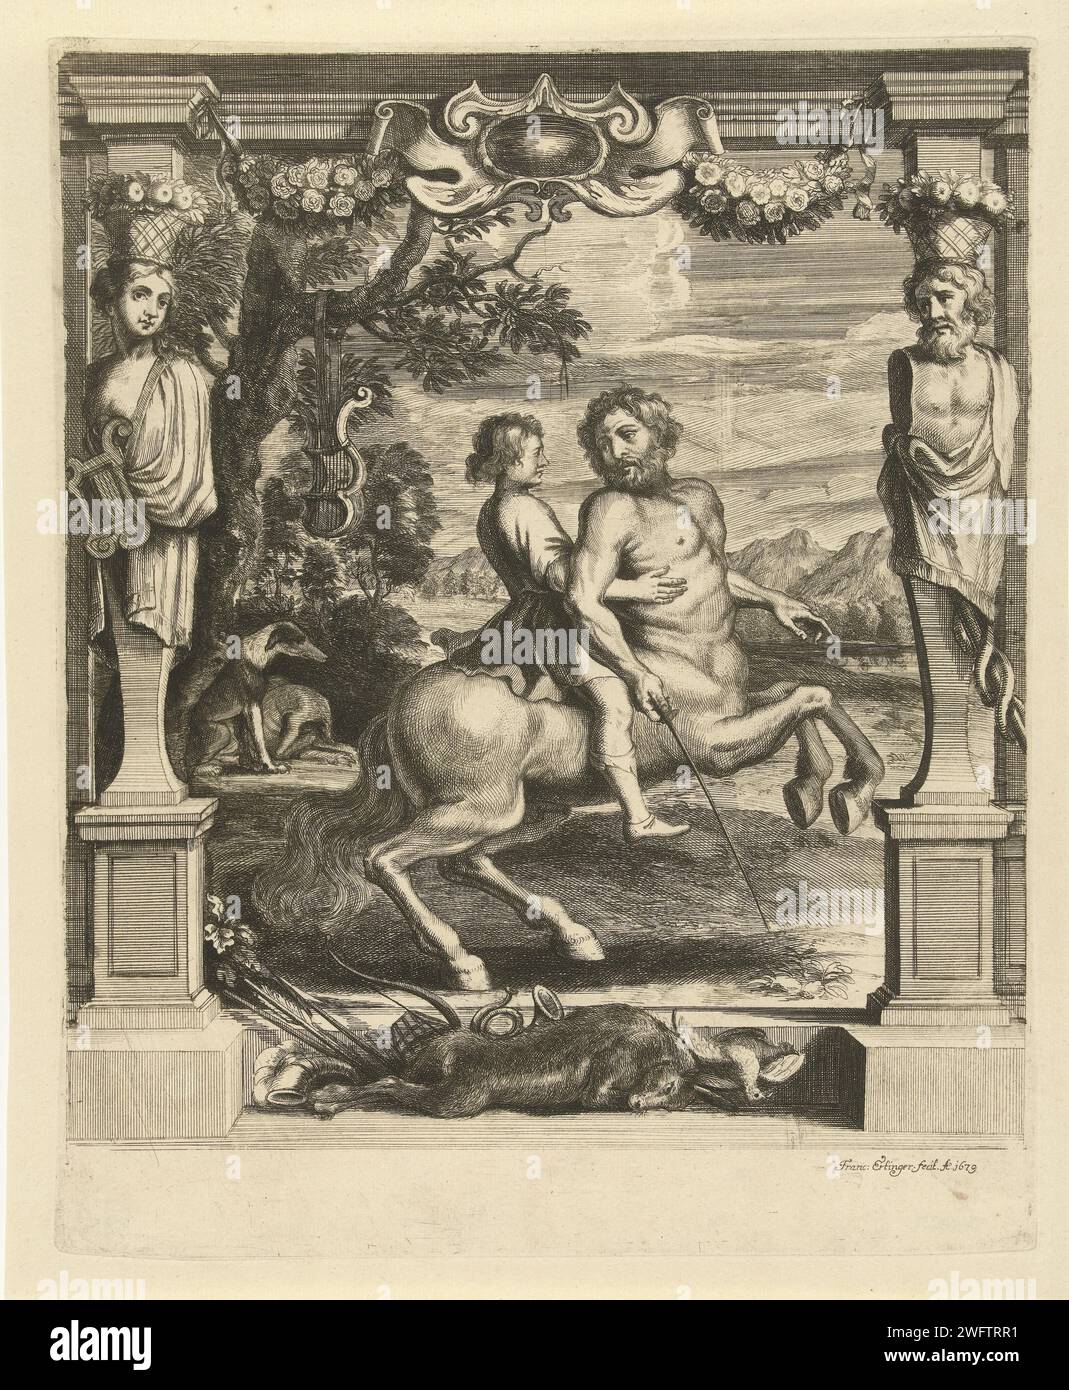 Achilles taught by Chiron, Franz Ertinger, After Peter Paul Rubens, 1679 print Achilles is sitting on the back of the Centaur Chiron. In the background dogs under a tree that hangs a winch. In the foreground a Caryatide and Atalant and shot game. Antwerp paper etching Thetis hands Achilles over to Chiron, the centaur Stock Photo